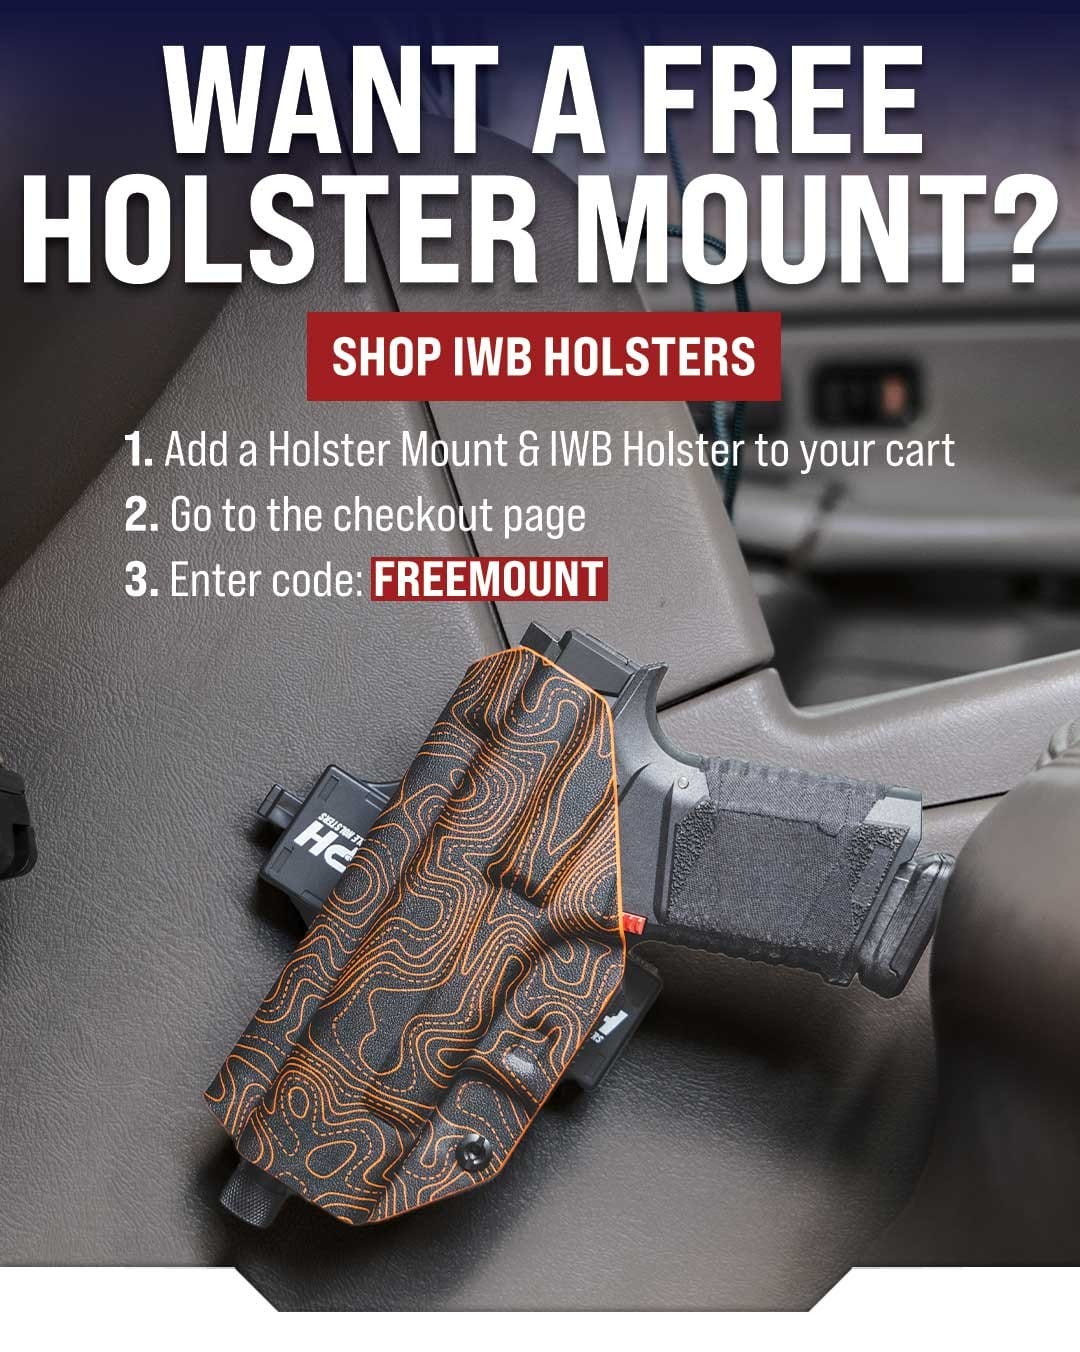 Want a FREE Holster Mount? Buy any holster and get one free w/ code FREEMOUNT